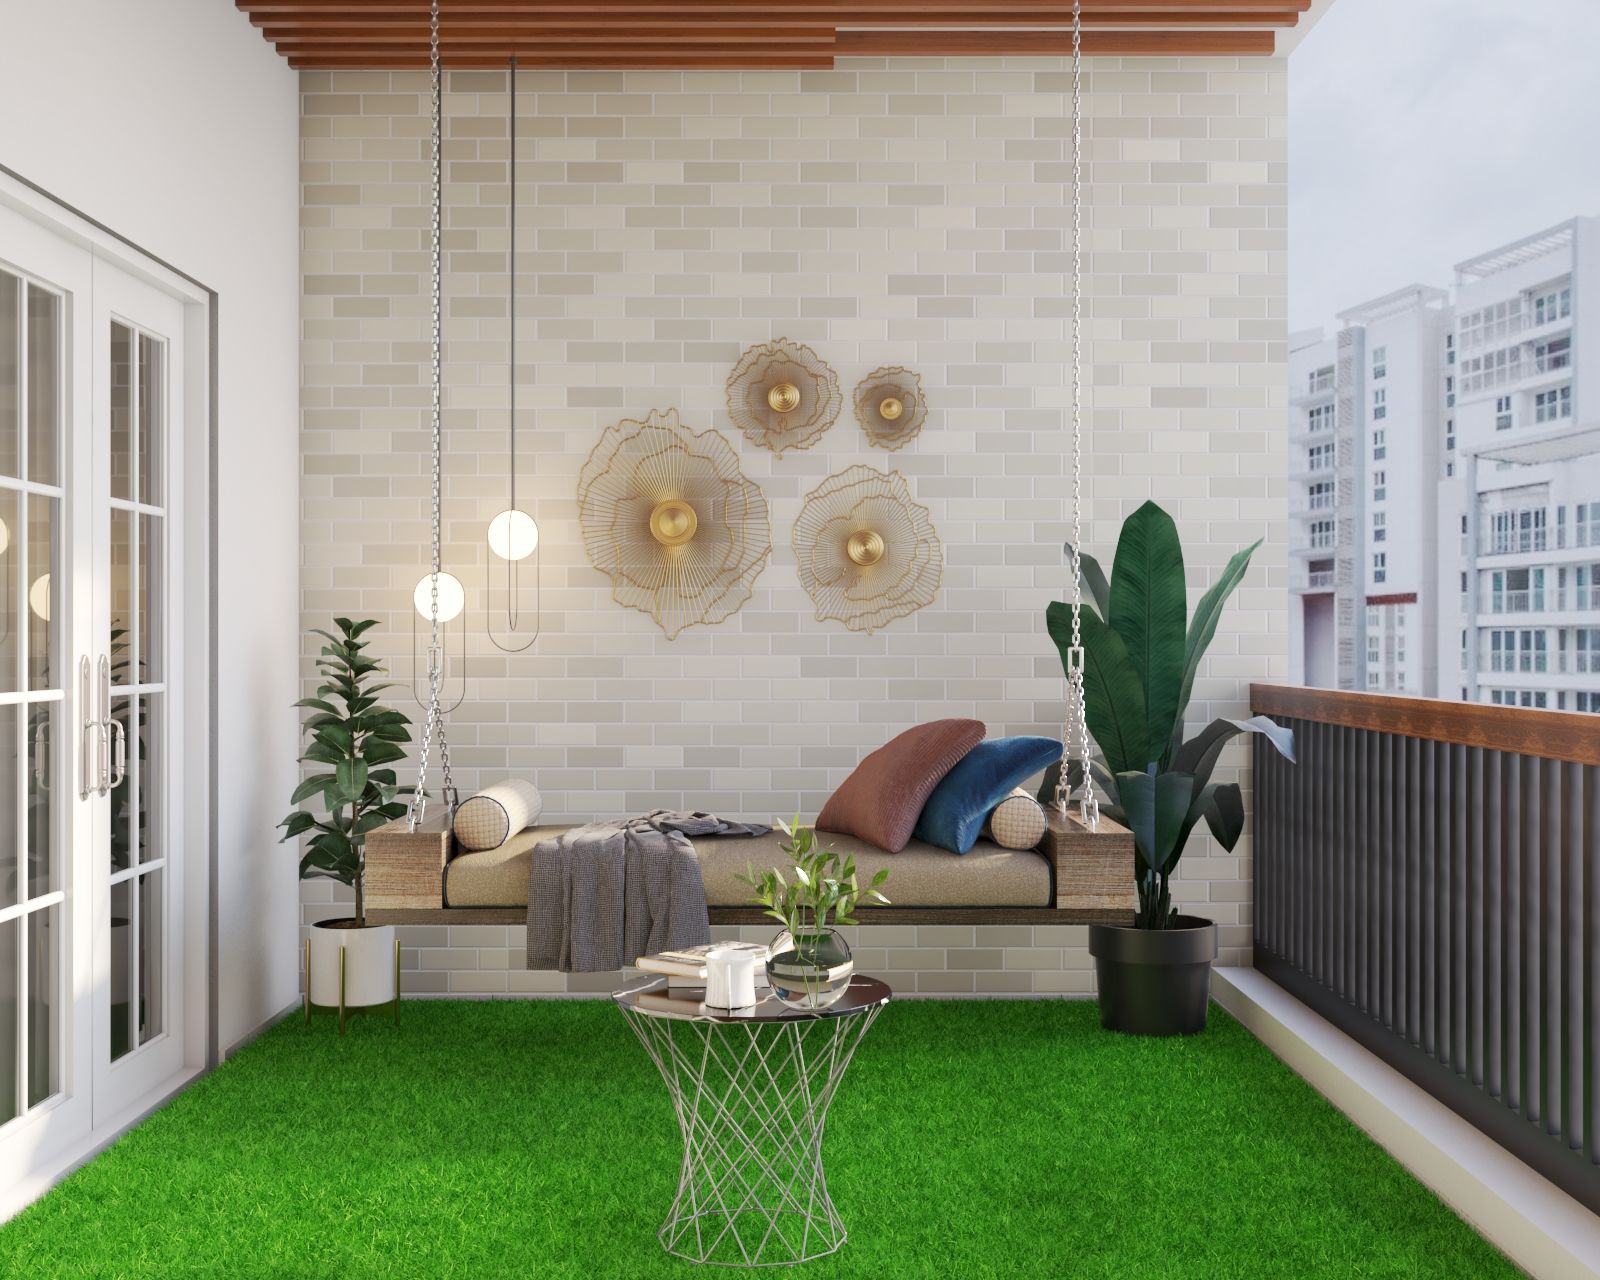 Modern Balcony Design With Wall Art And Textured Wall Paint